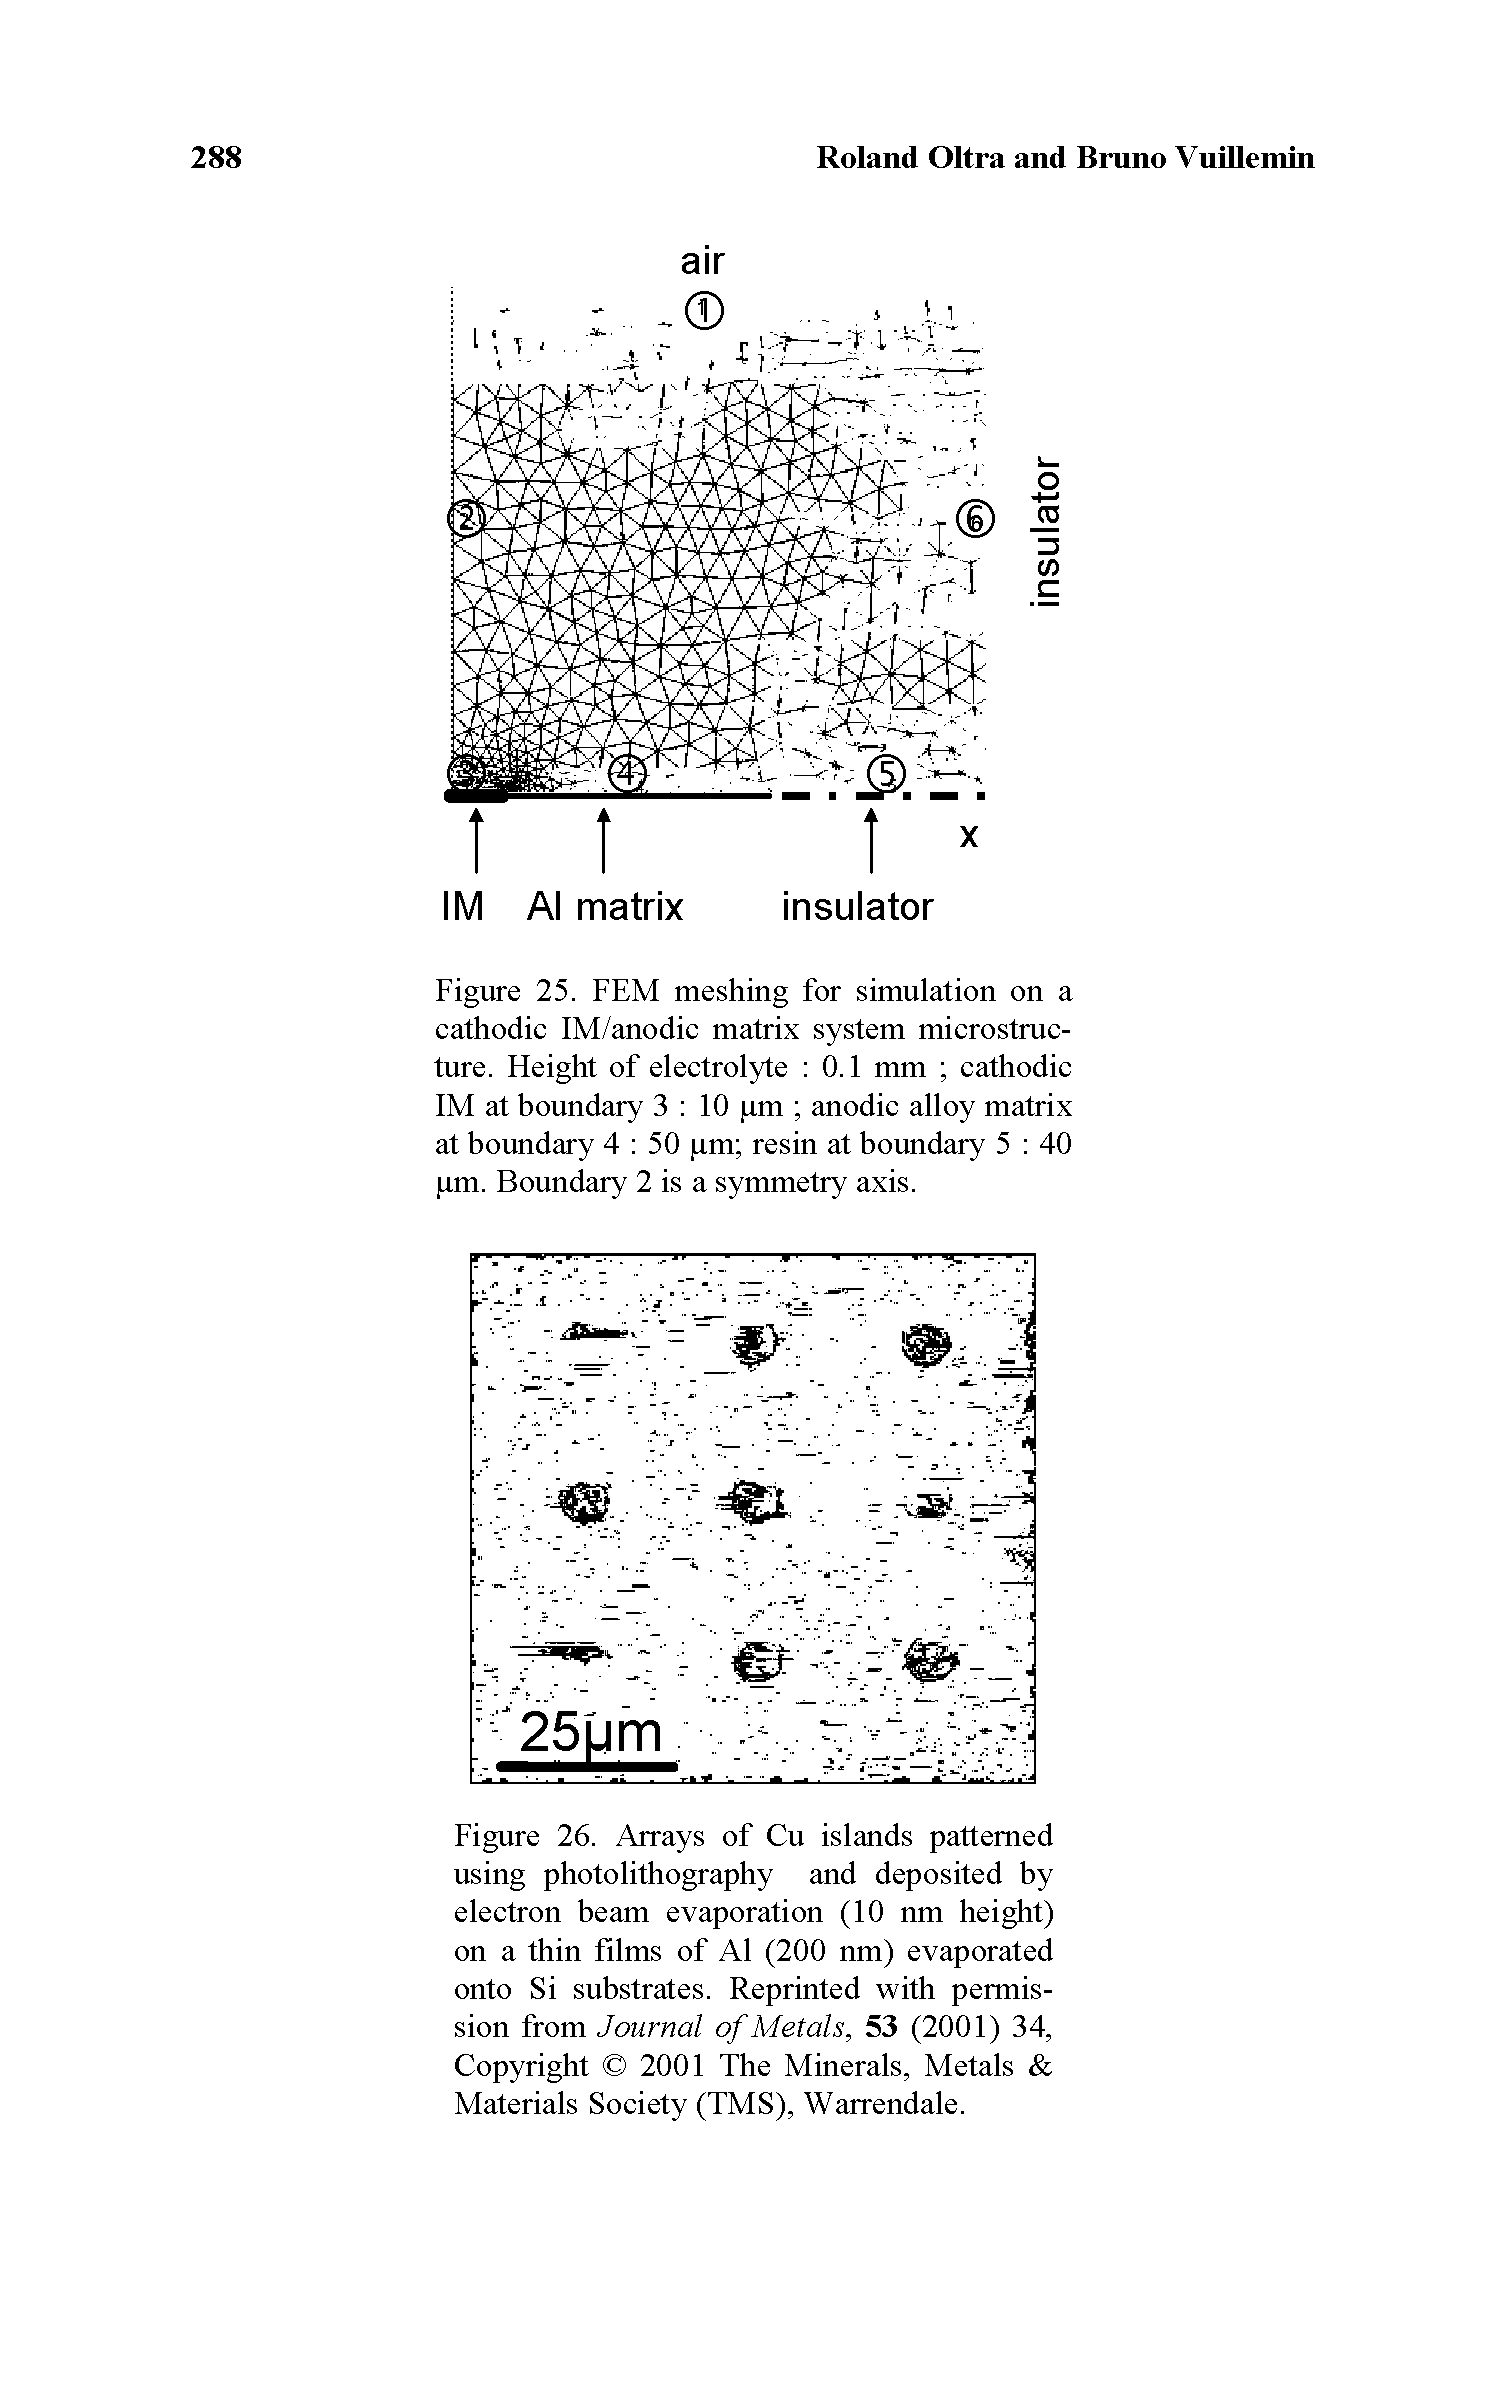 Figure 26. Arrays of Cu islands patterned using photolithography and deposited by electron beam evaporation (10 nm height) on a thin films of Al (200 nm) evaporated onto Si substrates. Reprinted with permission from Journal of Metals, 53 (2001) 34, Copyright 2001 The Minerals, Metals Materials Society (TMS), Warrendale.